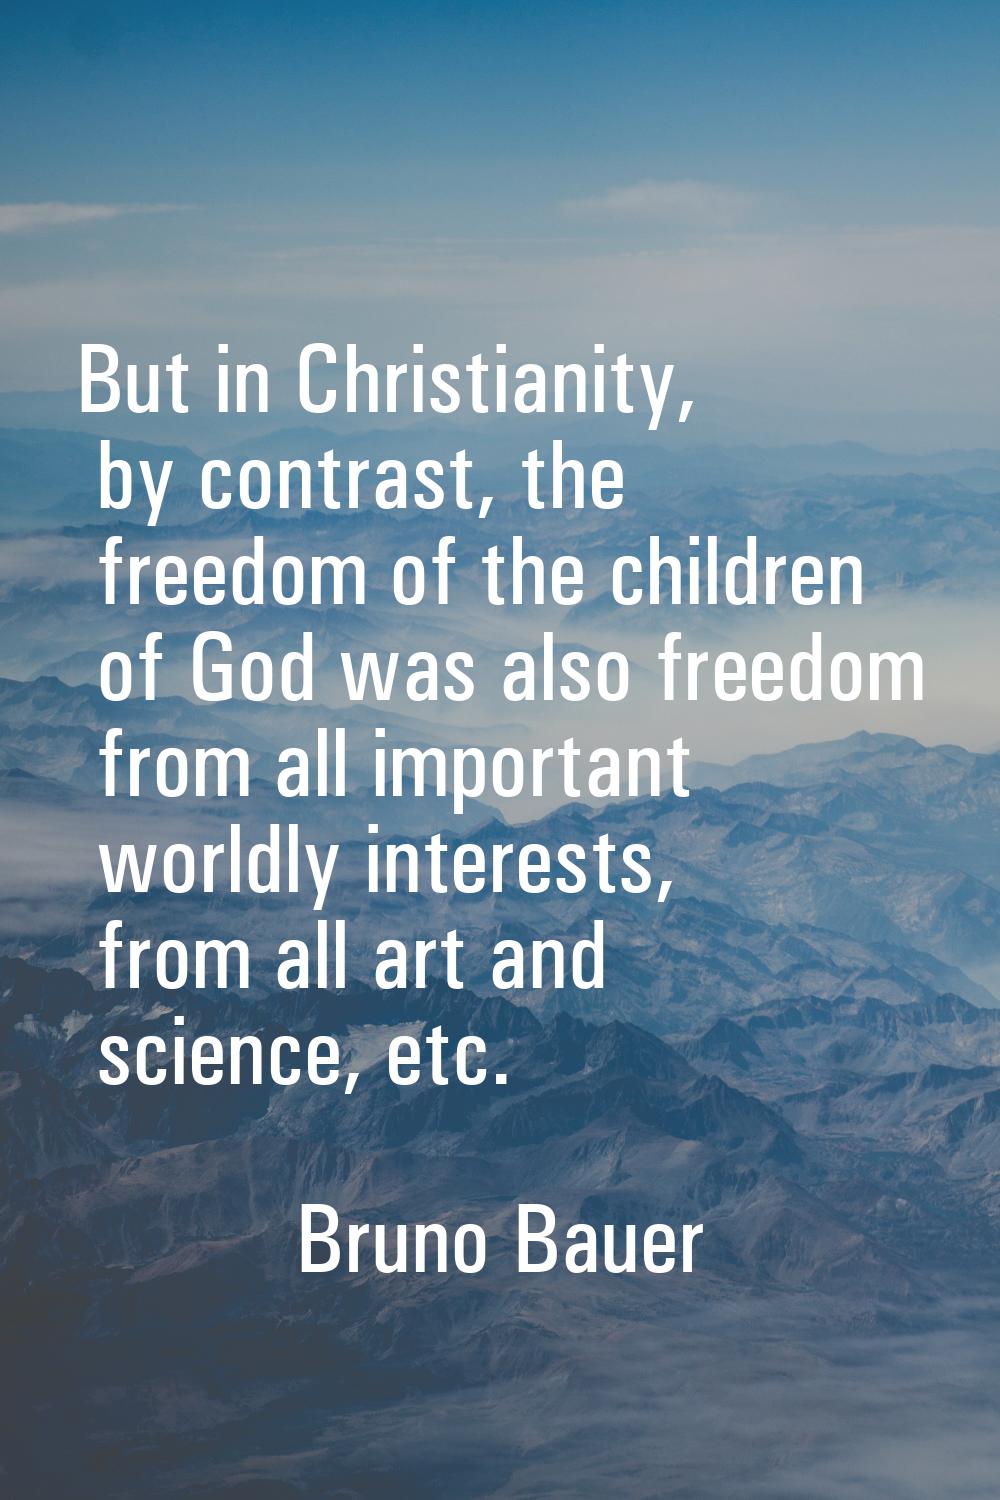 But in Christianity, by contrast, the freedom of the children of God was also freedom from all impo